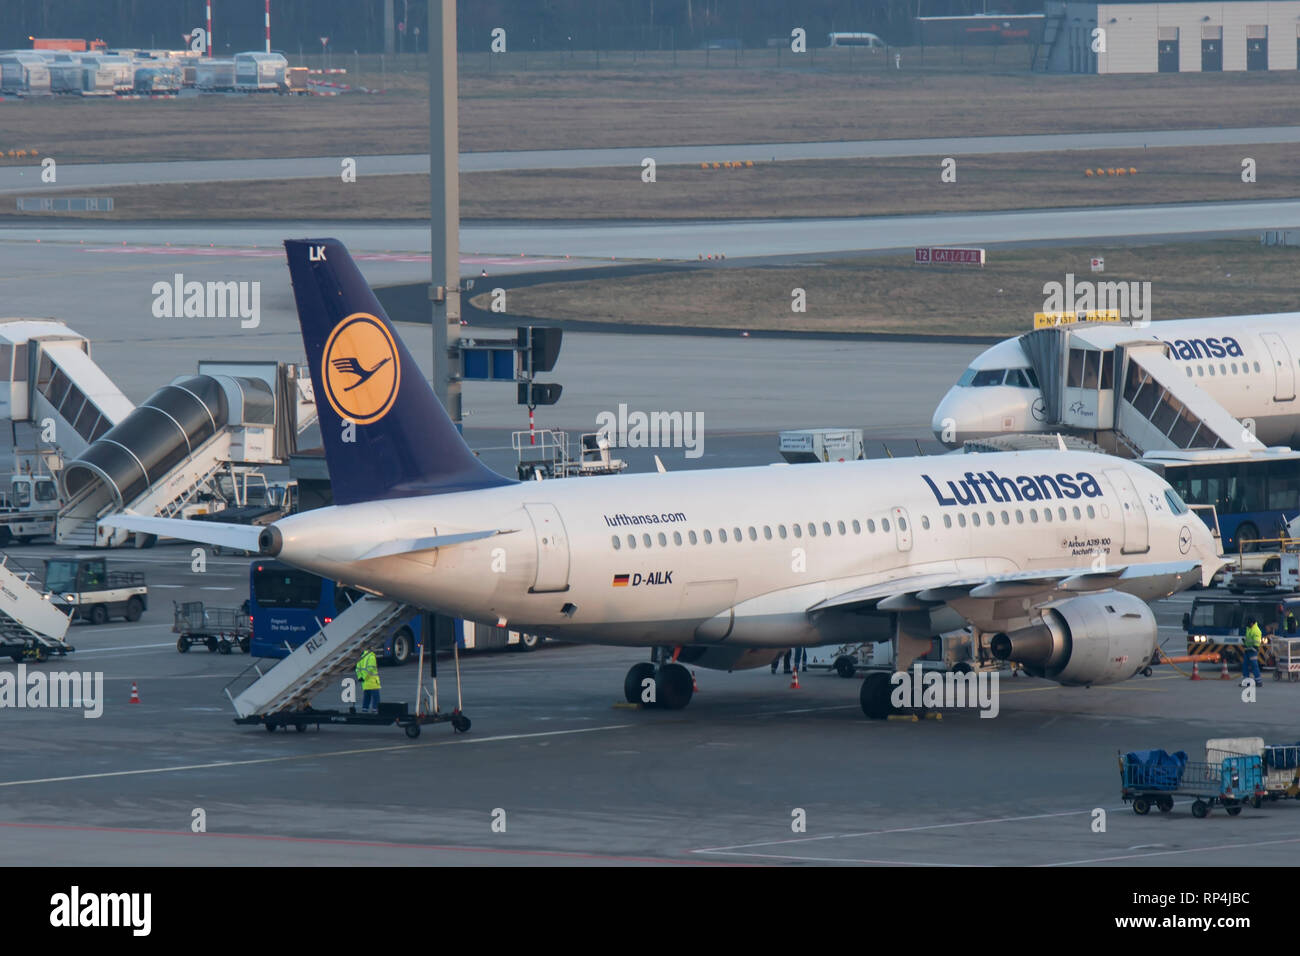 D-AILK Airbus A319 of Lufthansa parked at Frankfurt Airport 07/02/2018 Stock Photo